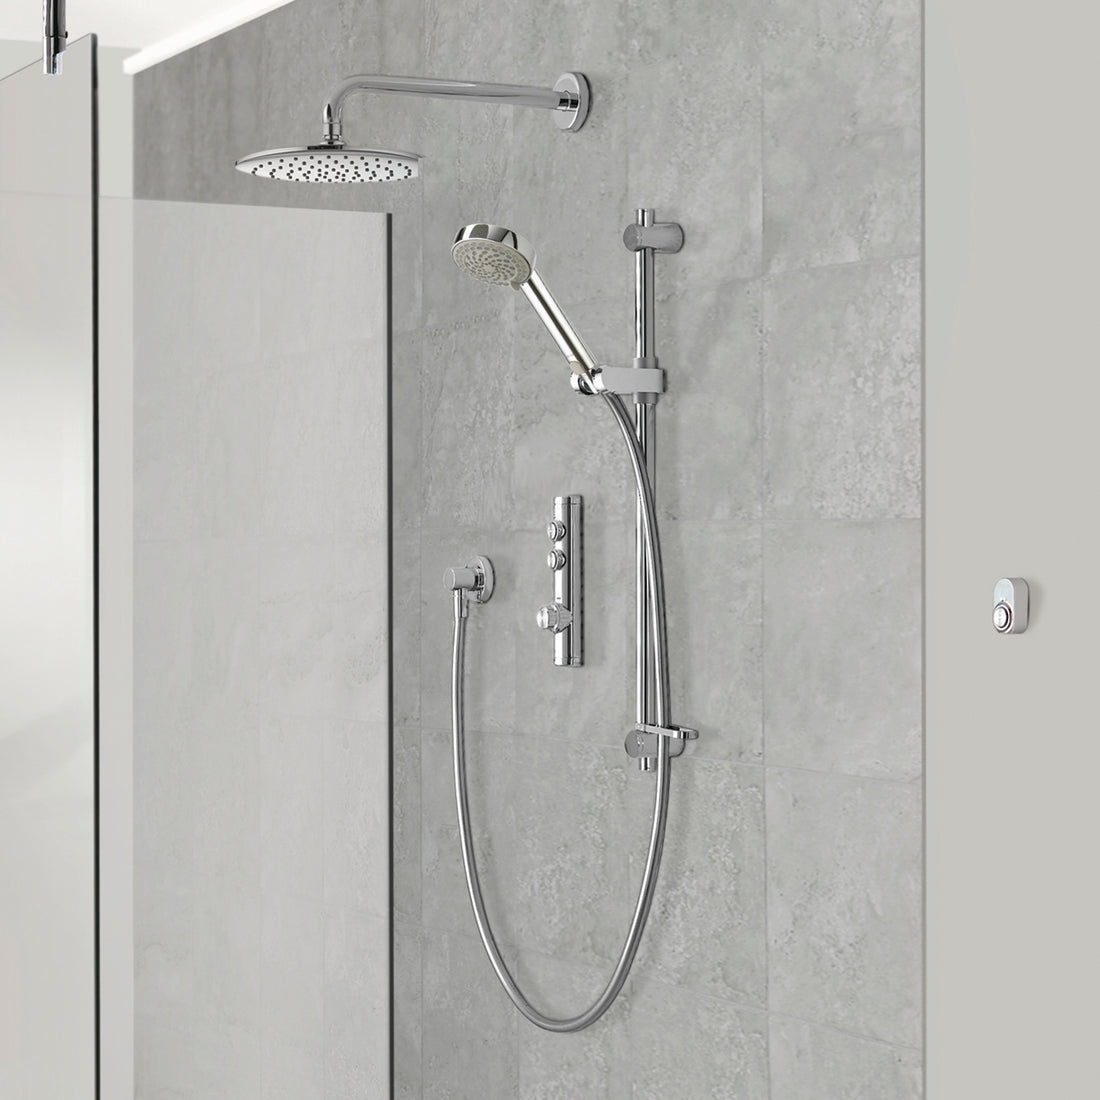 Aqualisa Isystem Smart Shower - Concealed With Adjustable &amp; Wall Fixed Head against light grey wall panel ISD.A1.BV.DVFW.21